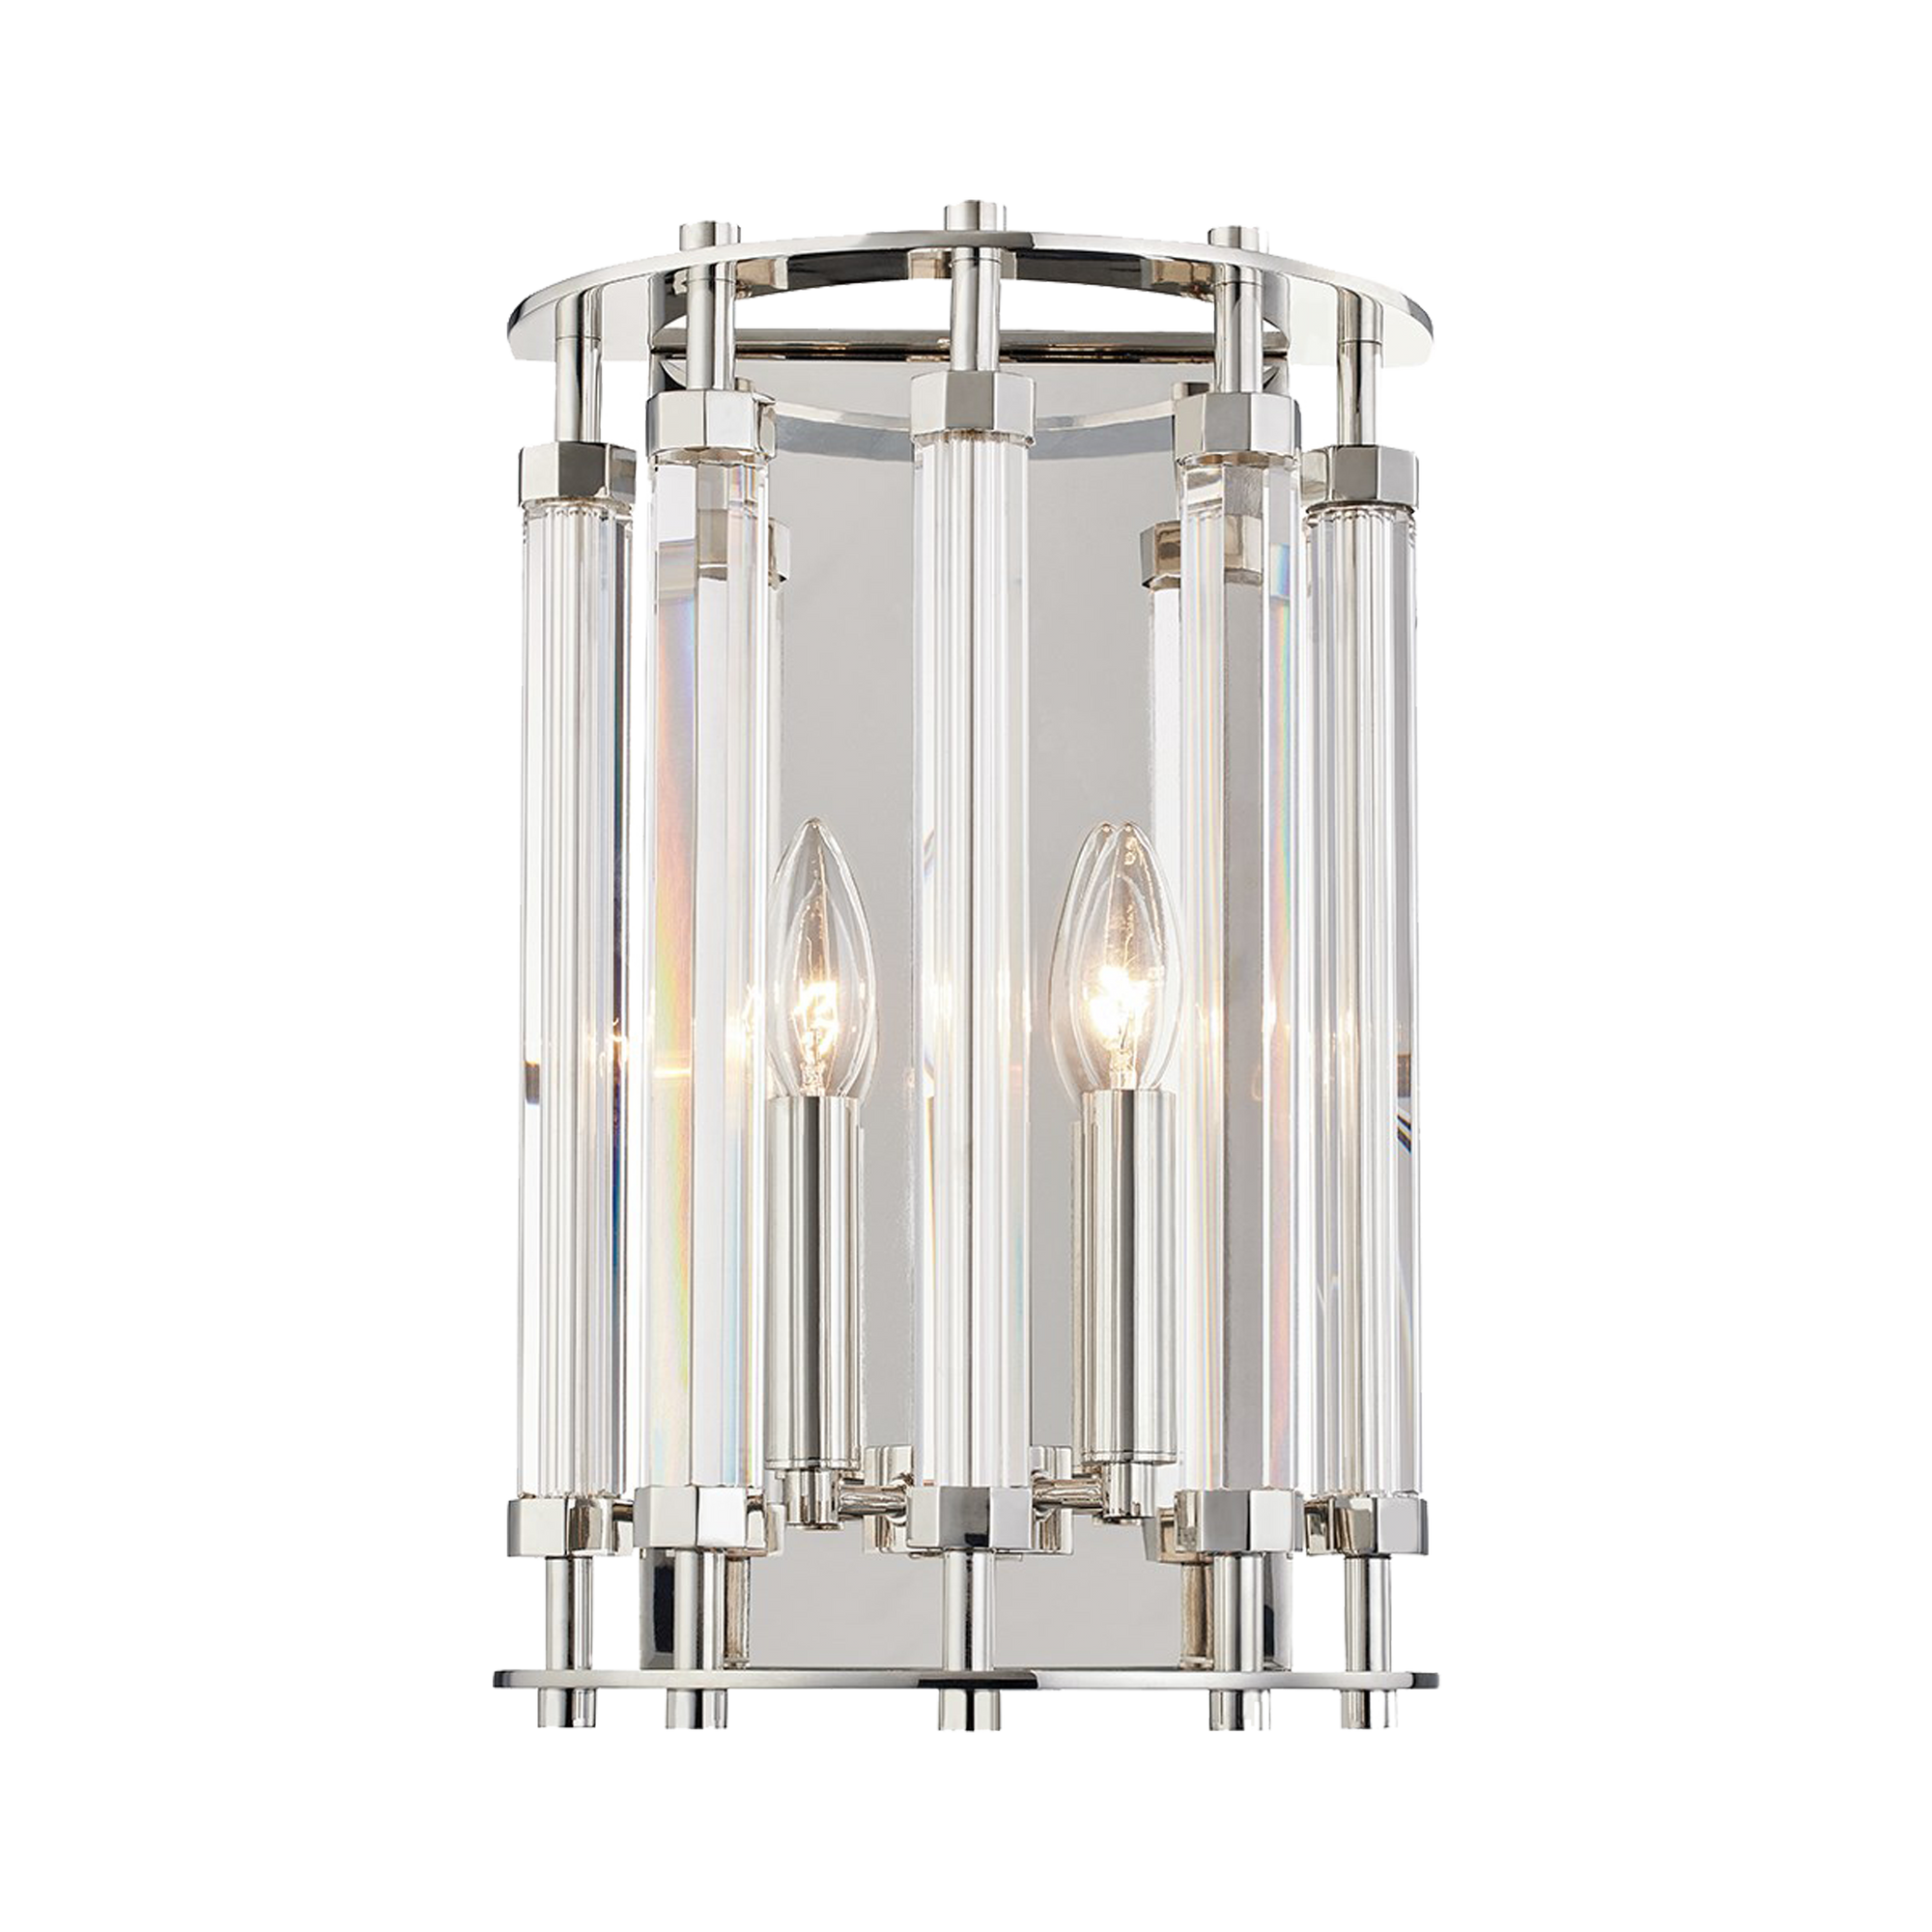 Hexagonal crystal rods refract and bounce the light around beautifully.